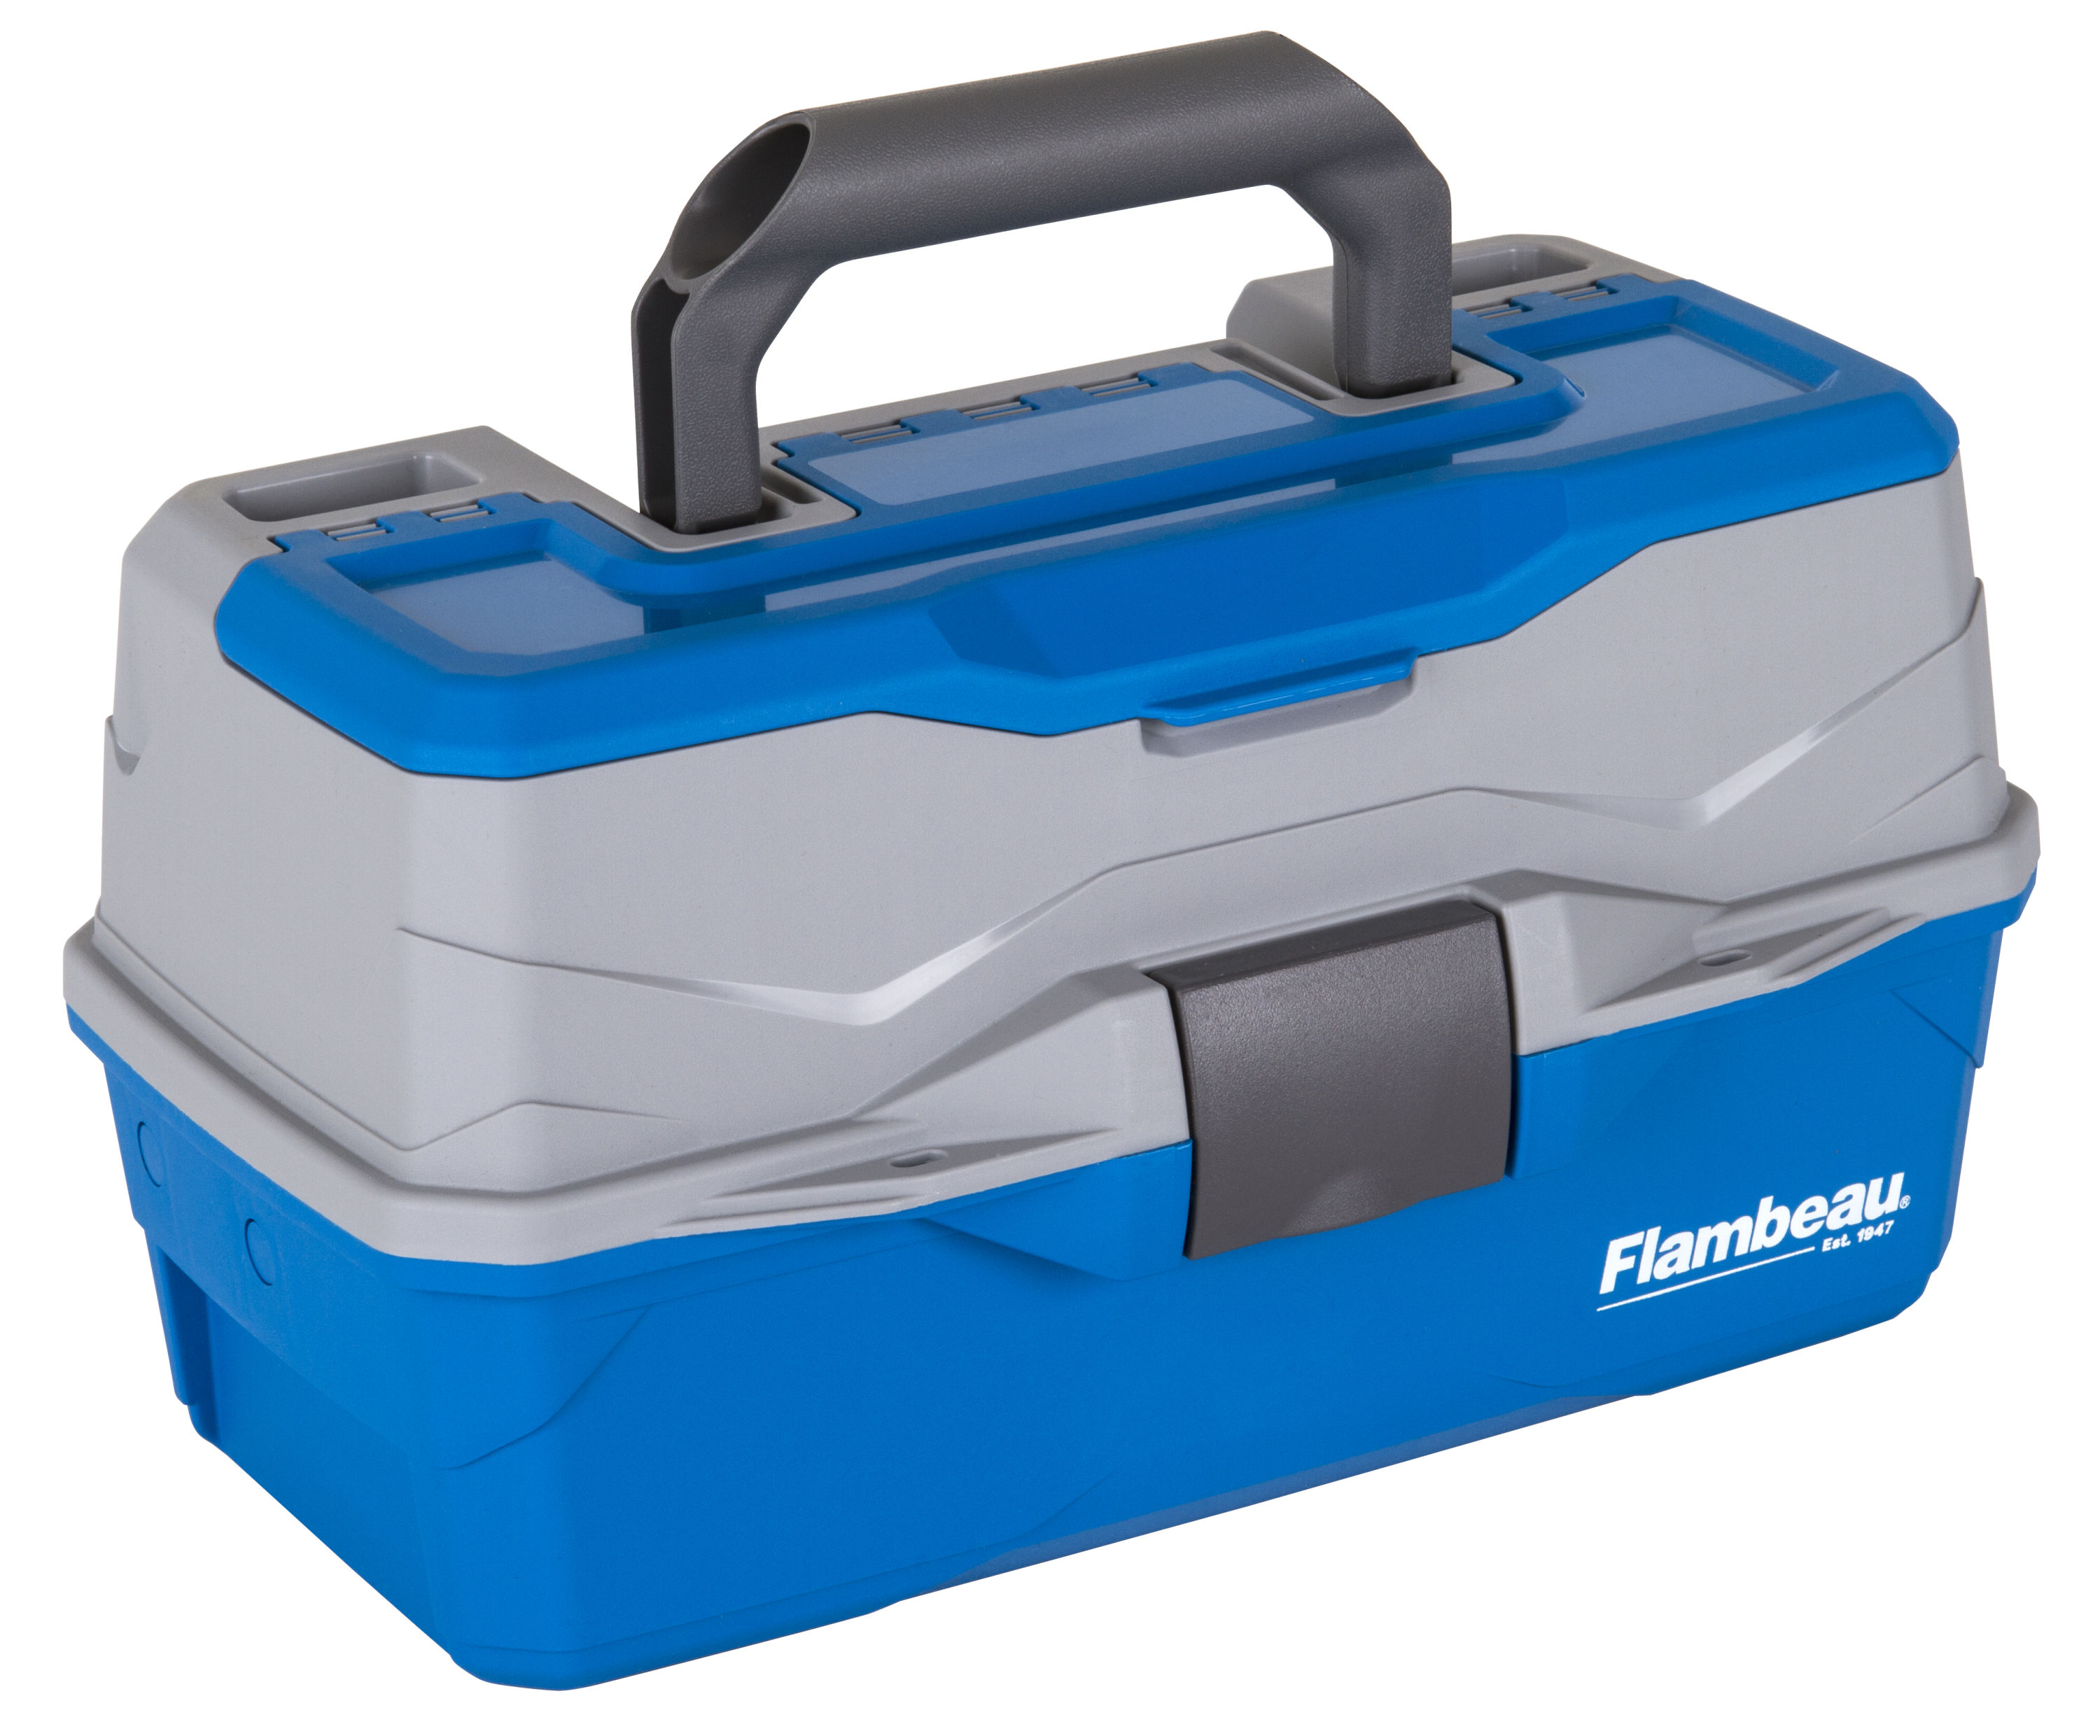 Flambeau Outdoors, 6382TB  Classic Two Tray Fishing Tackle Box, Blue, Plastic, 14 inches long - image 2 of 7